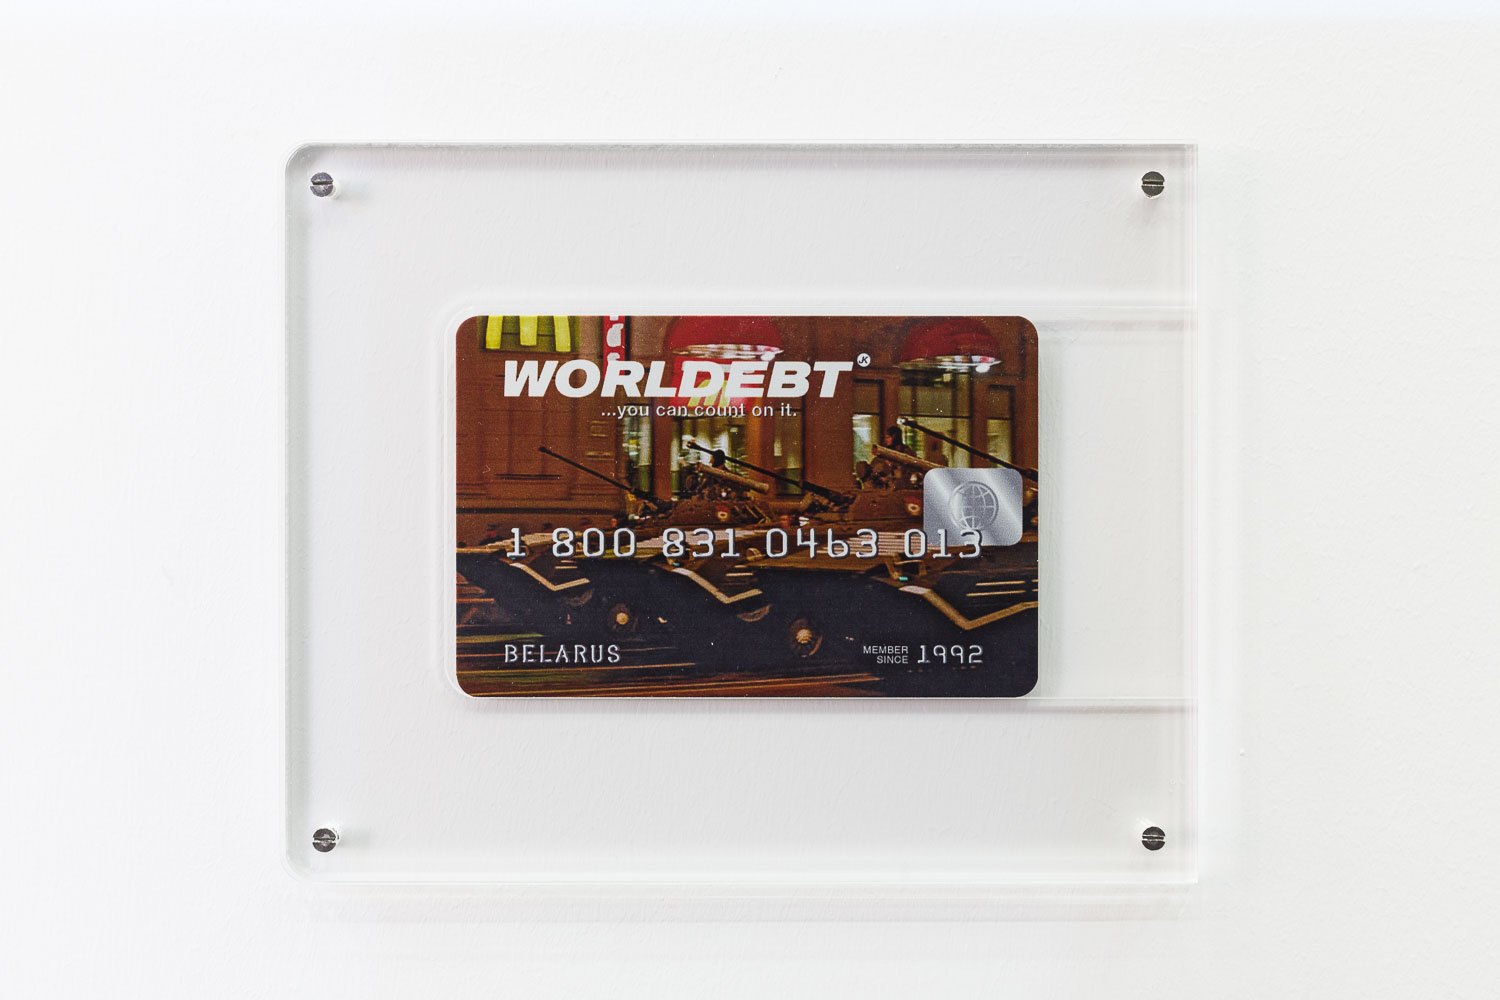 John Knight Worldebt, 1994/2015 Lithography on aluminum, 165 parts, 8 × 13 cm each (without frame) 